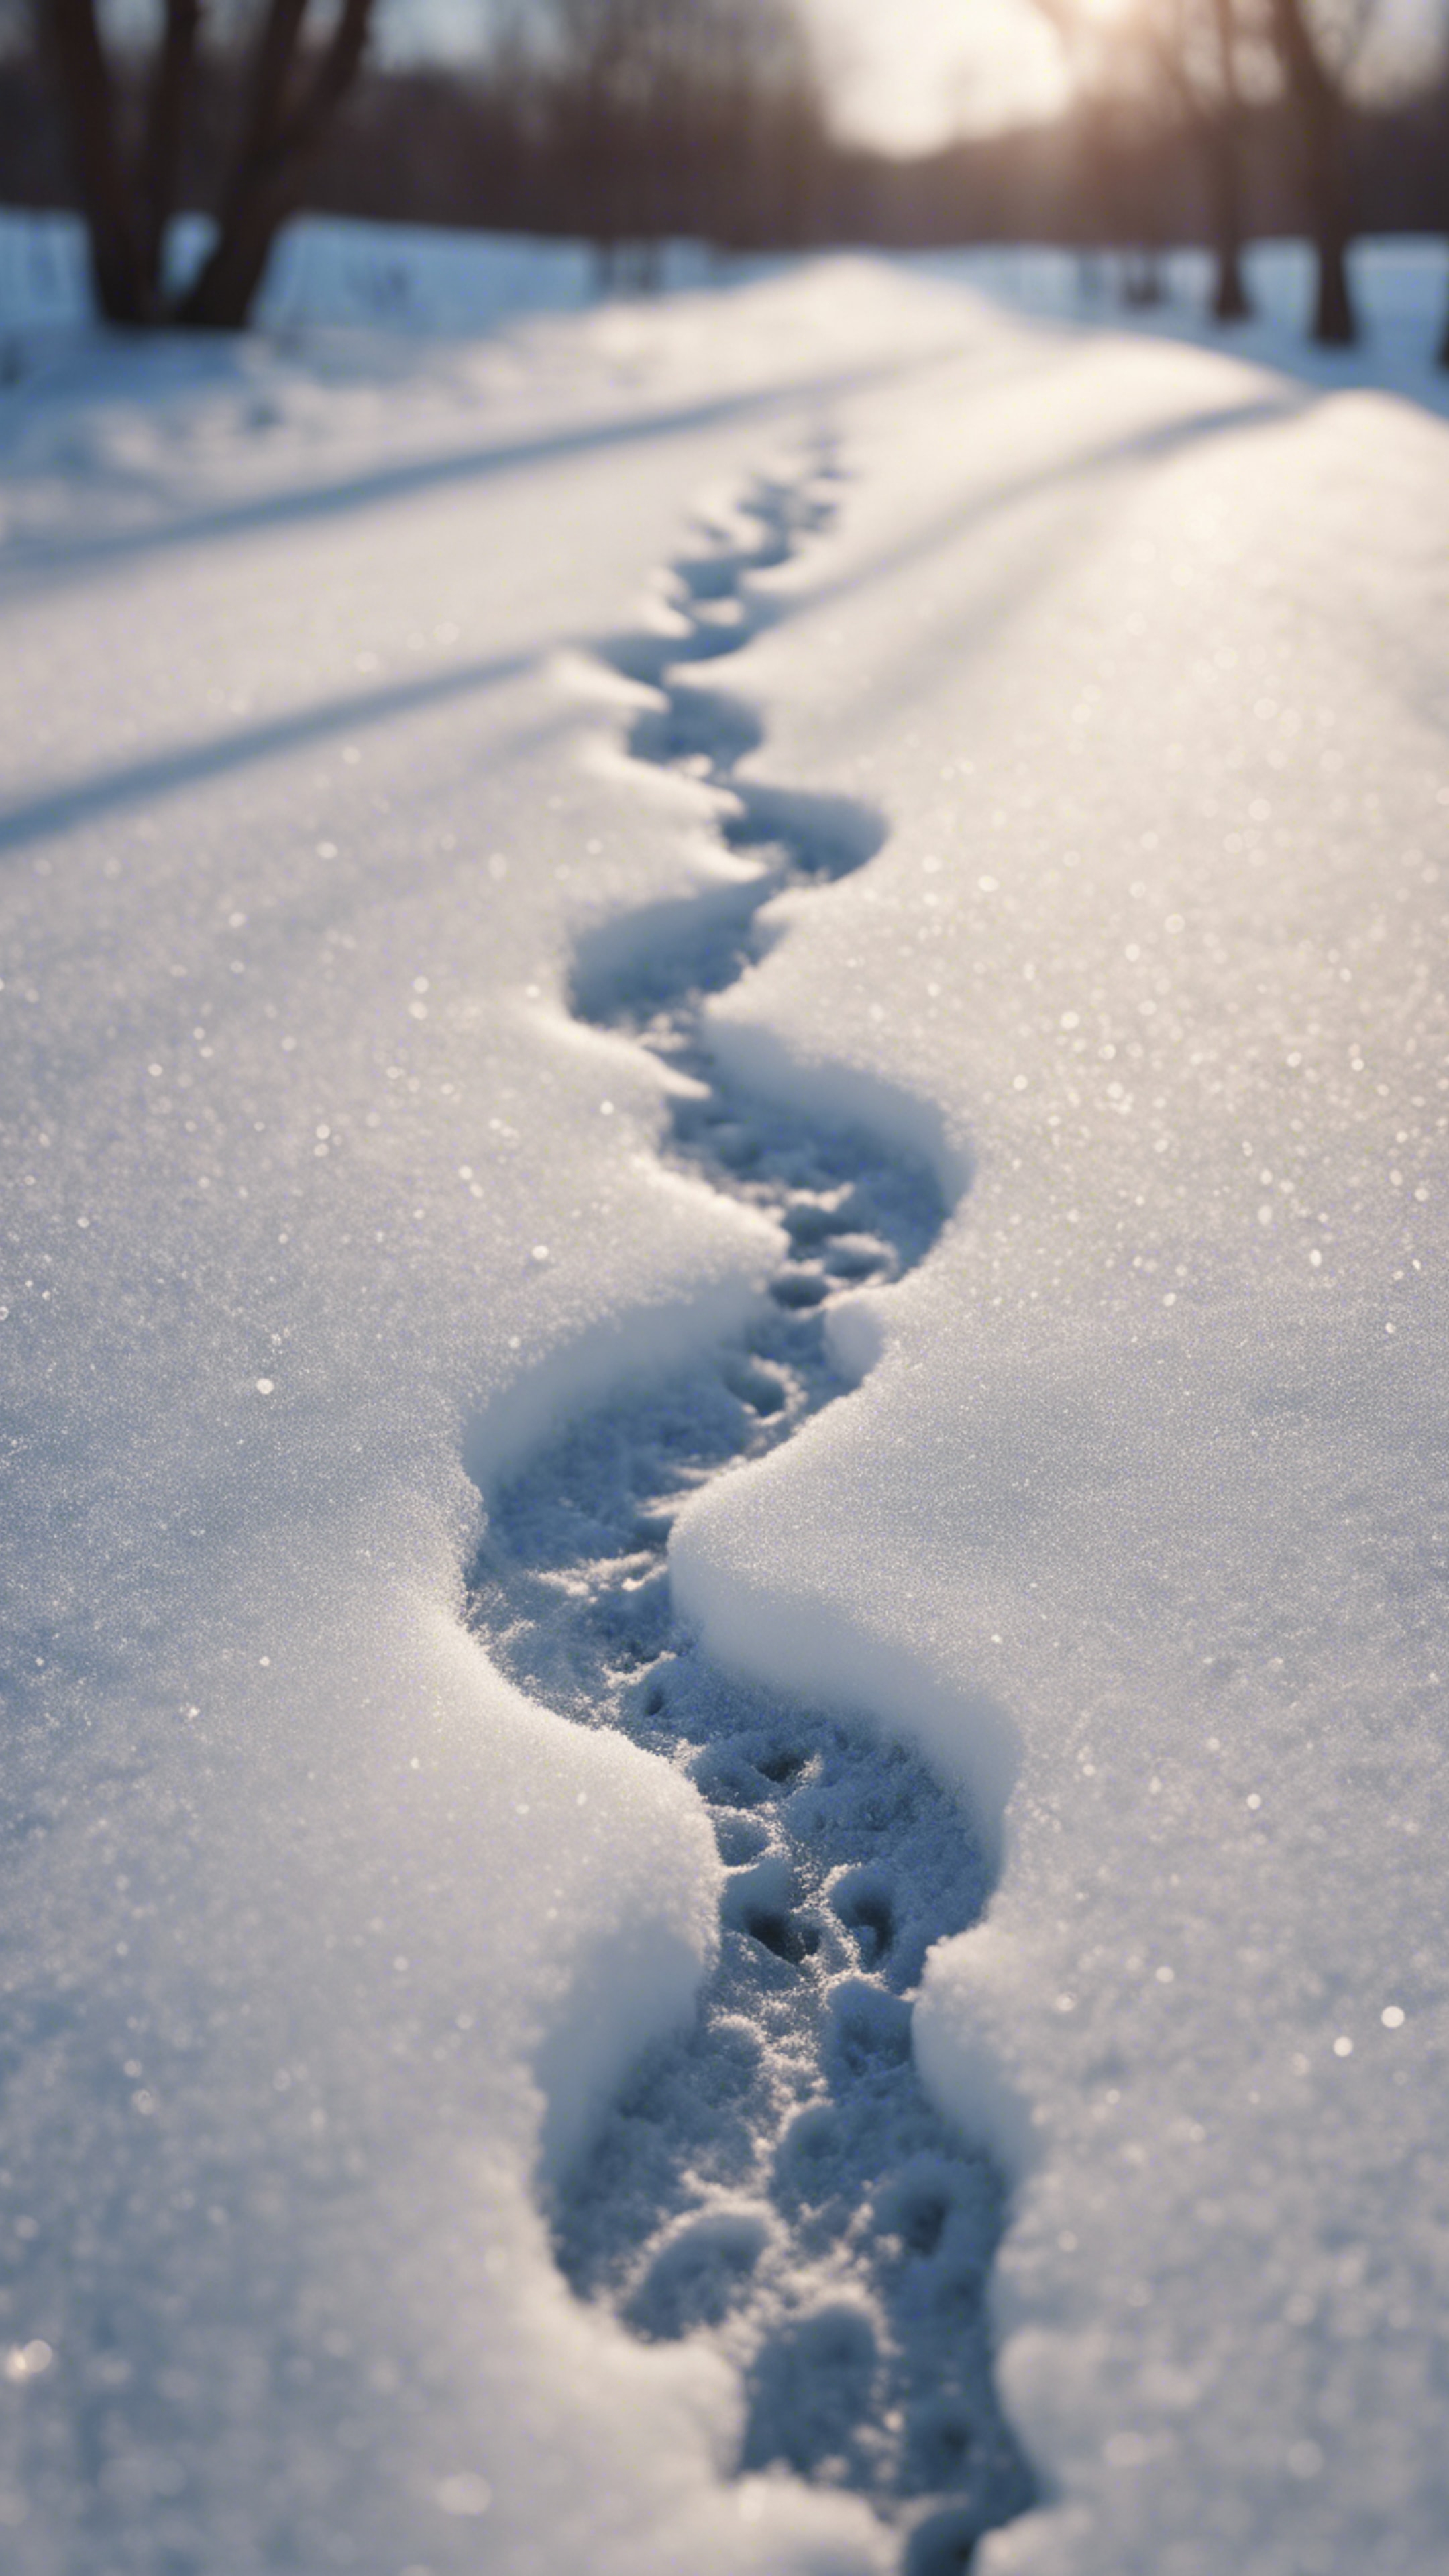 A pair of frosty, heart-shaped footprints imprinted on a snow-covered lane, symbolizing love in winter. Wallpaper[a9223da6c59742c6a00f]